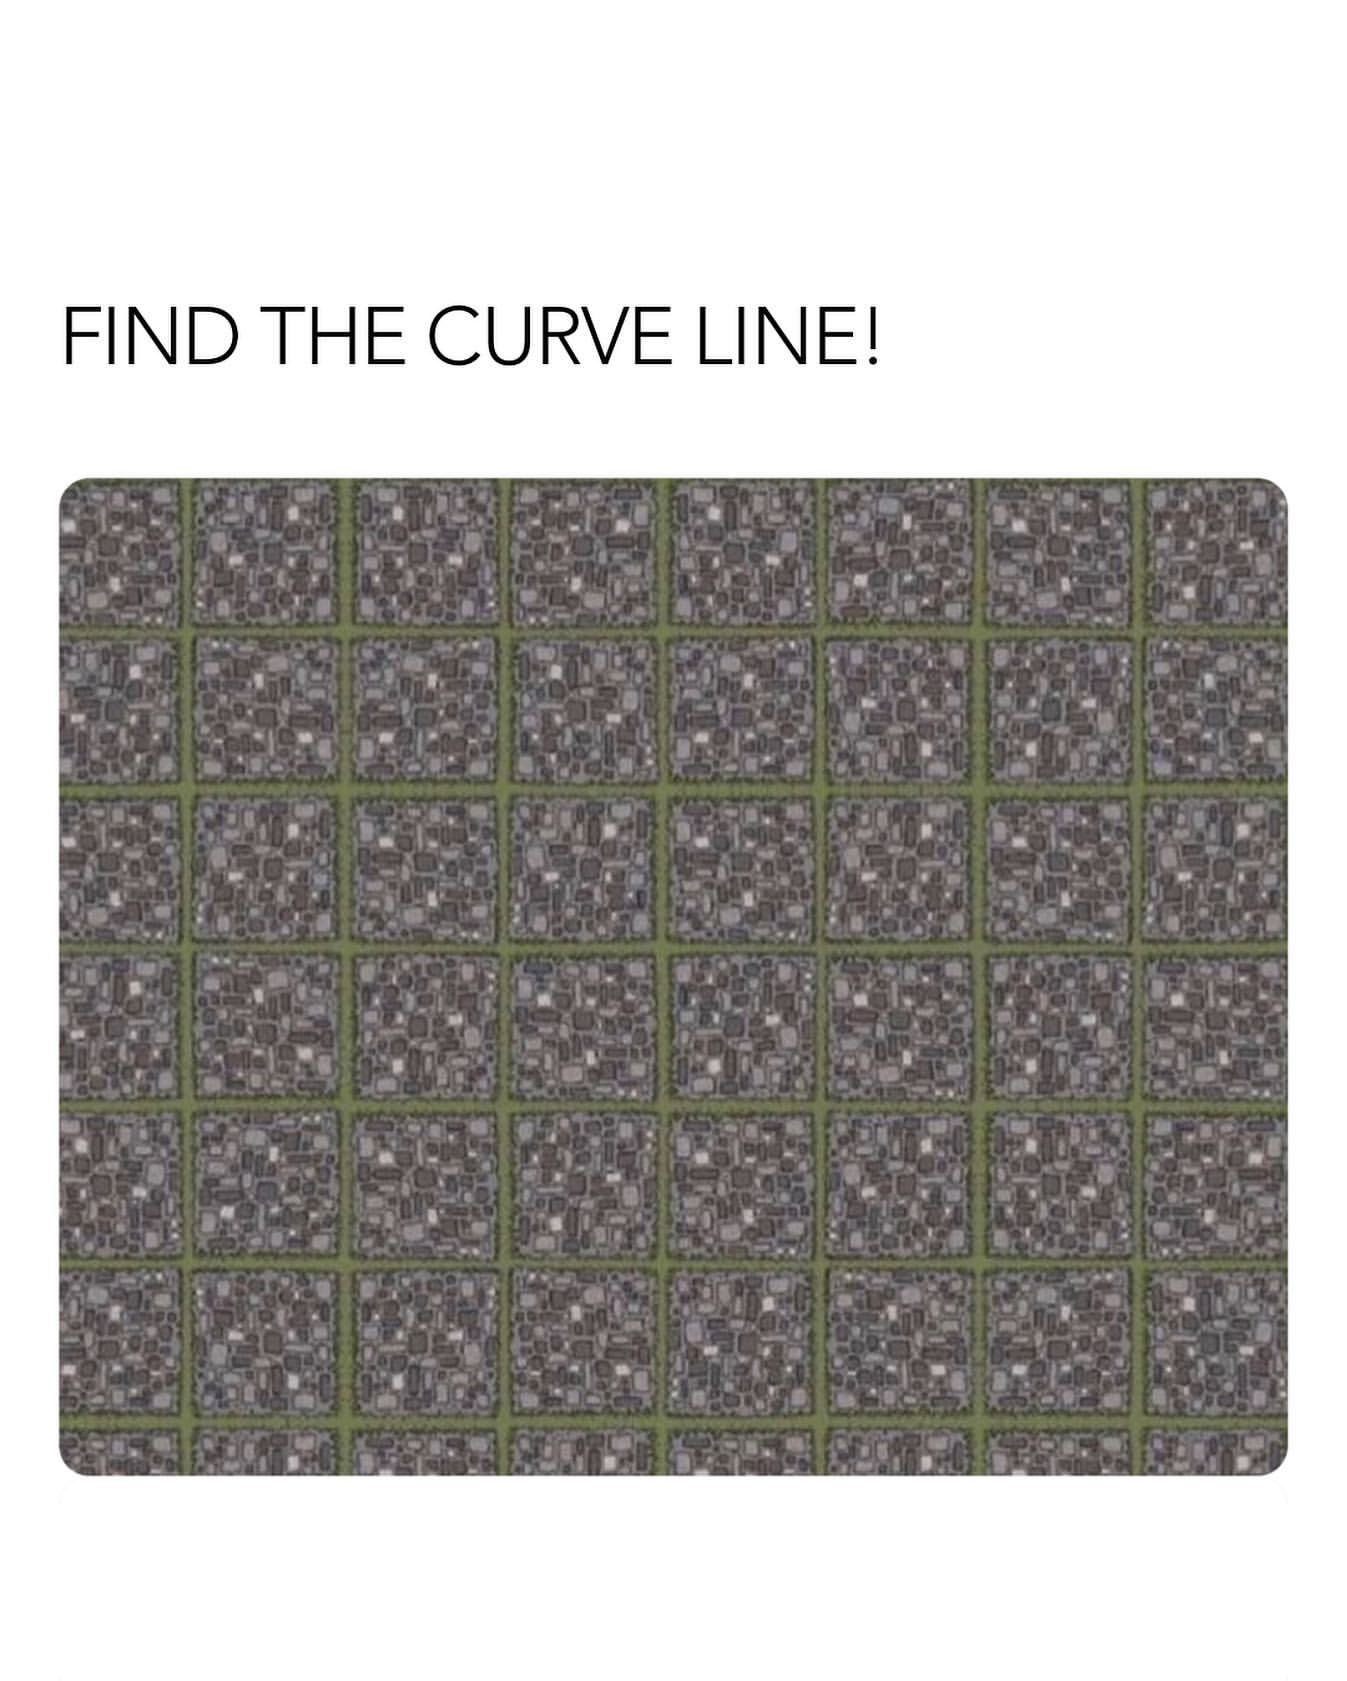 Find the curve line!